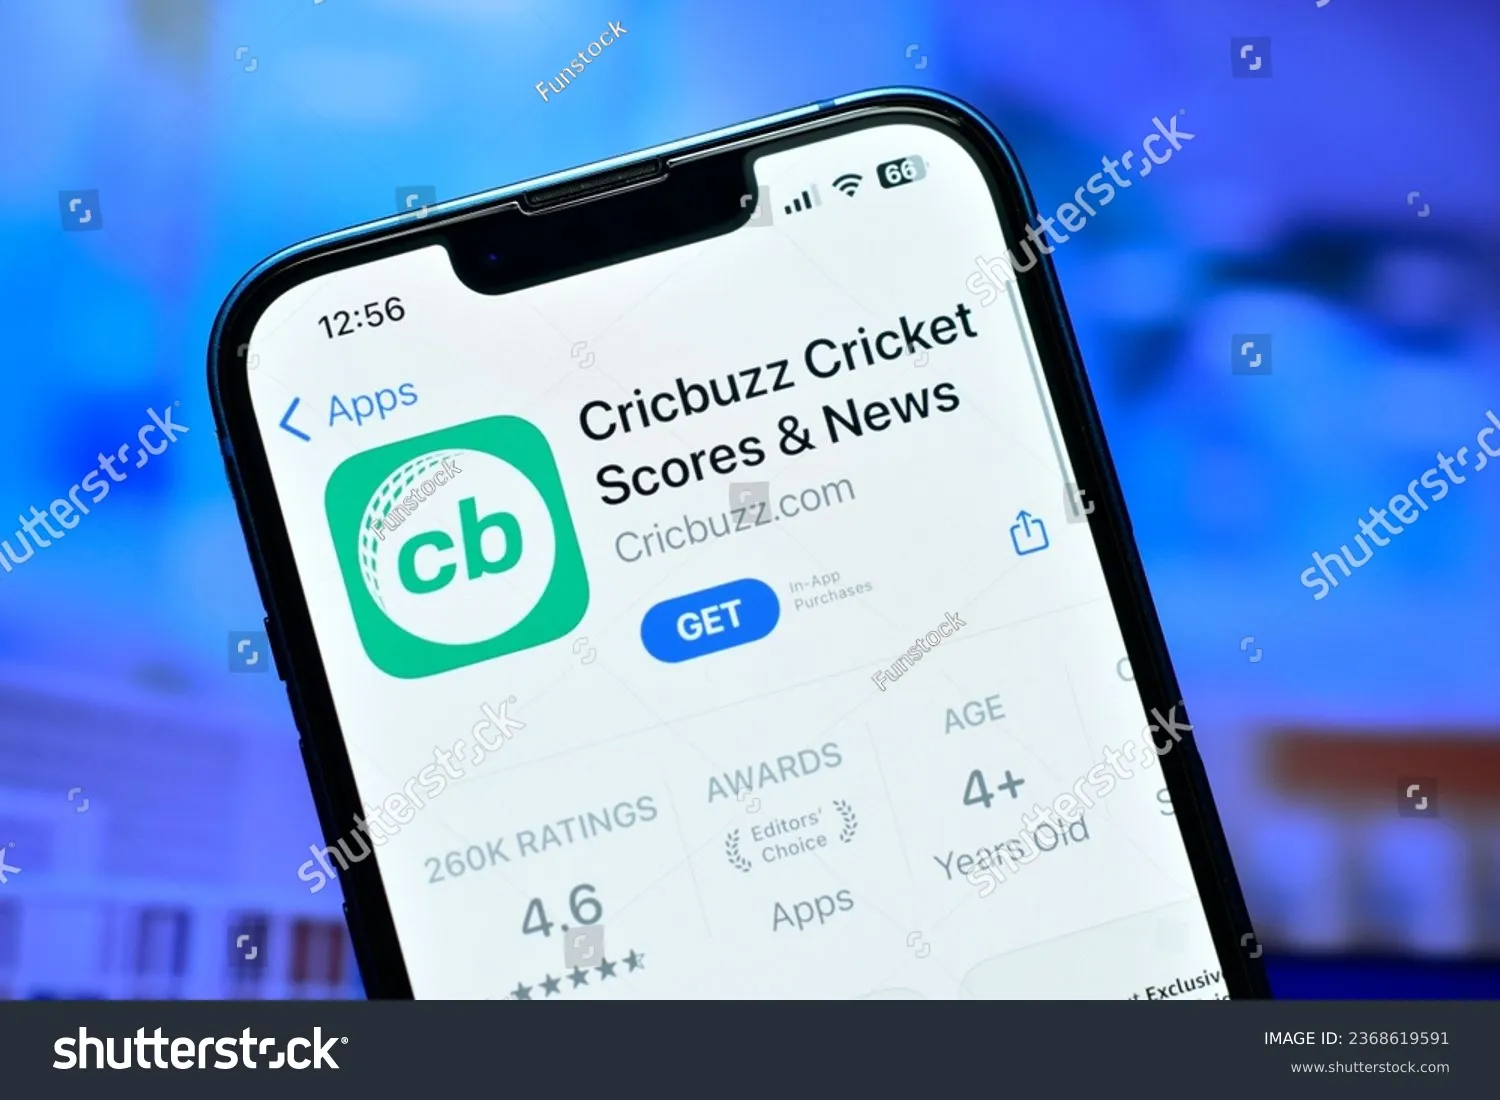 Stay Informed with Cricket News Apps: Cricbuzz in Focus